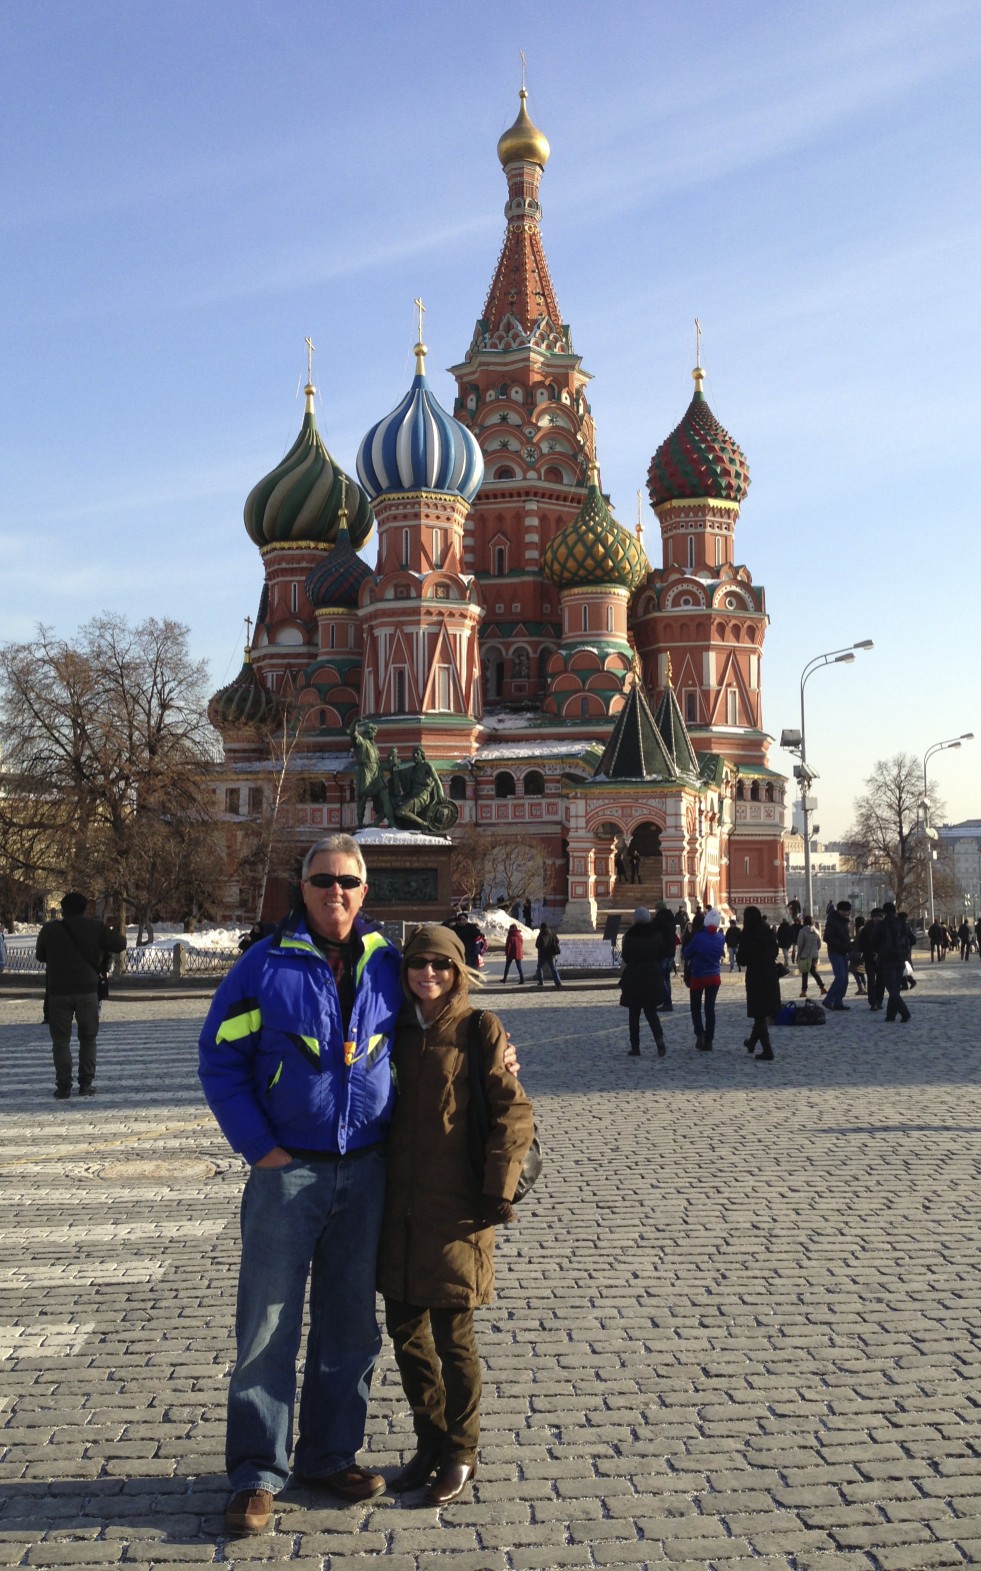 In the middle of Red Square.